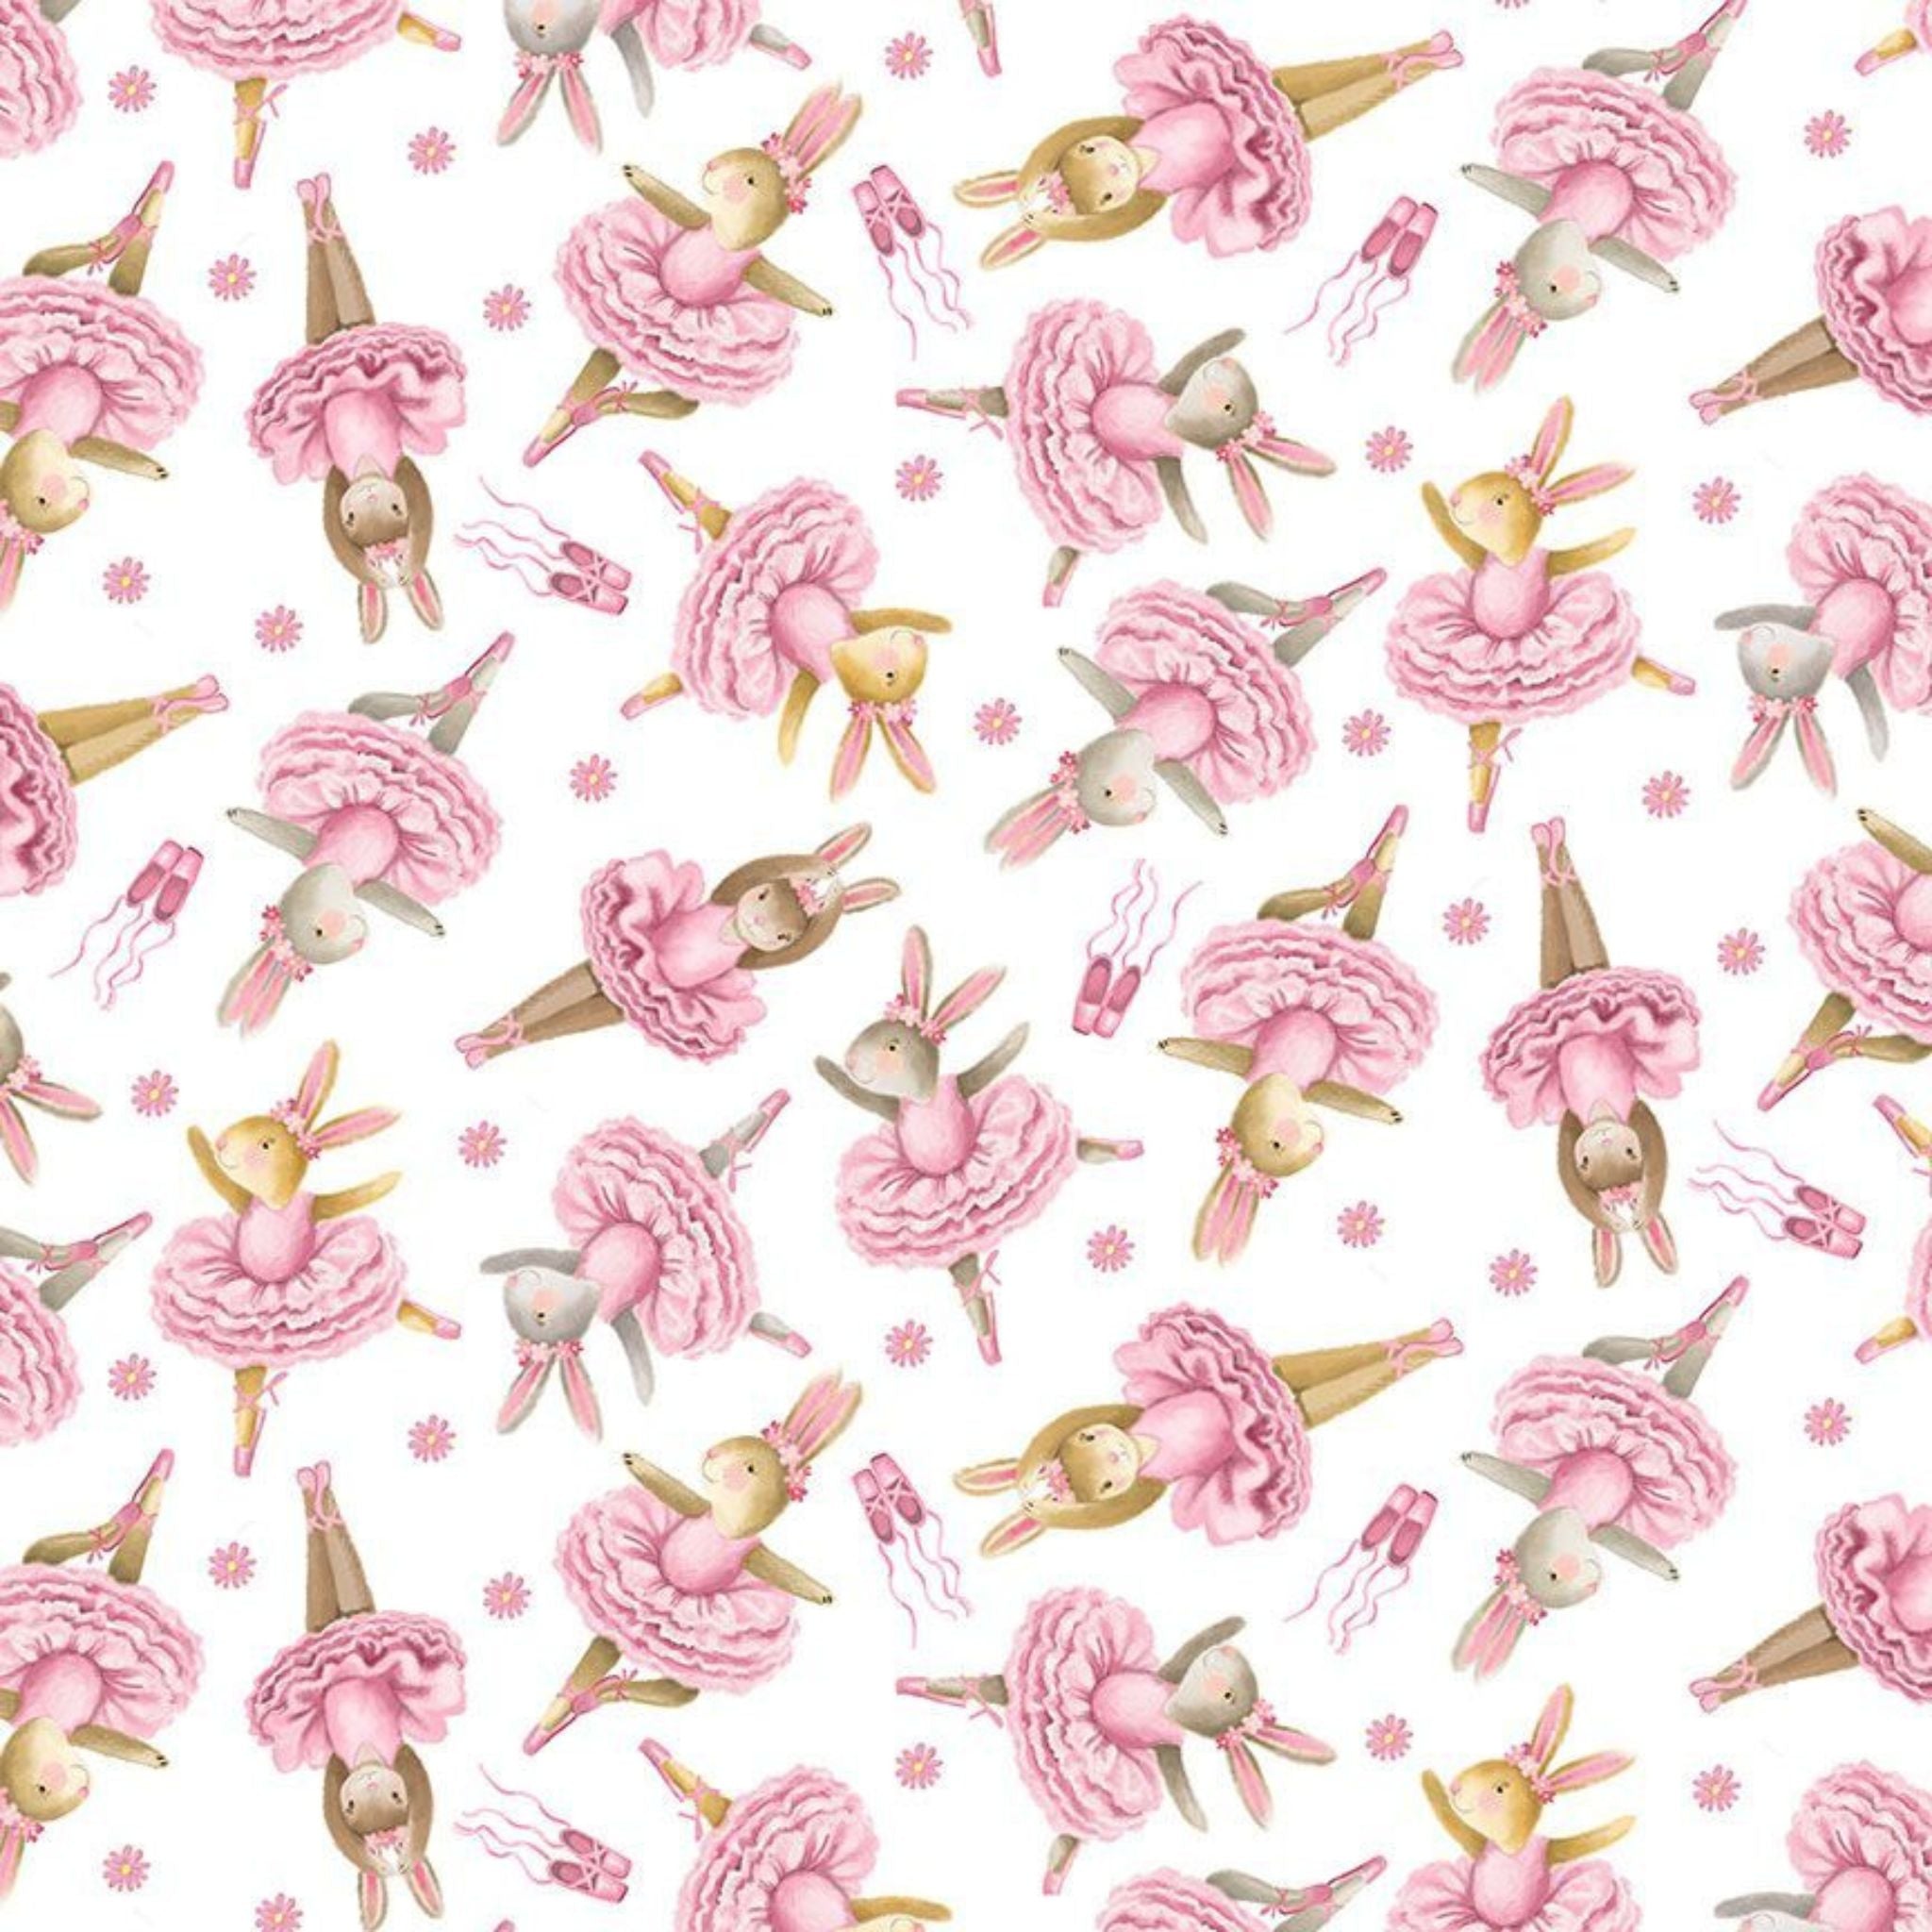 Bunny rabbits ballet dancing in pink tutus on a white cotton fabric - ballerina bunnies by Timeless Treasures